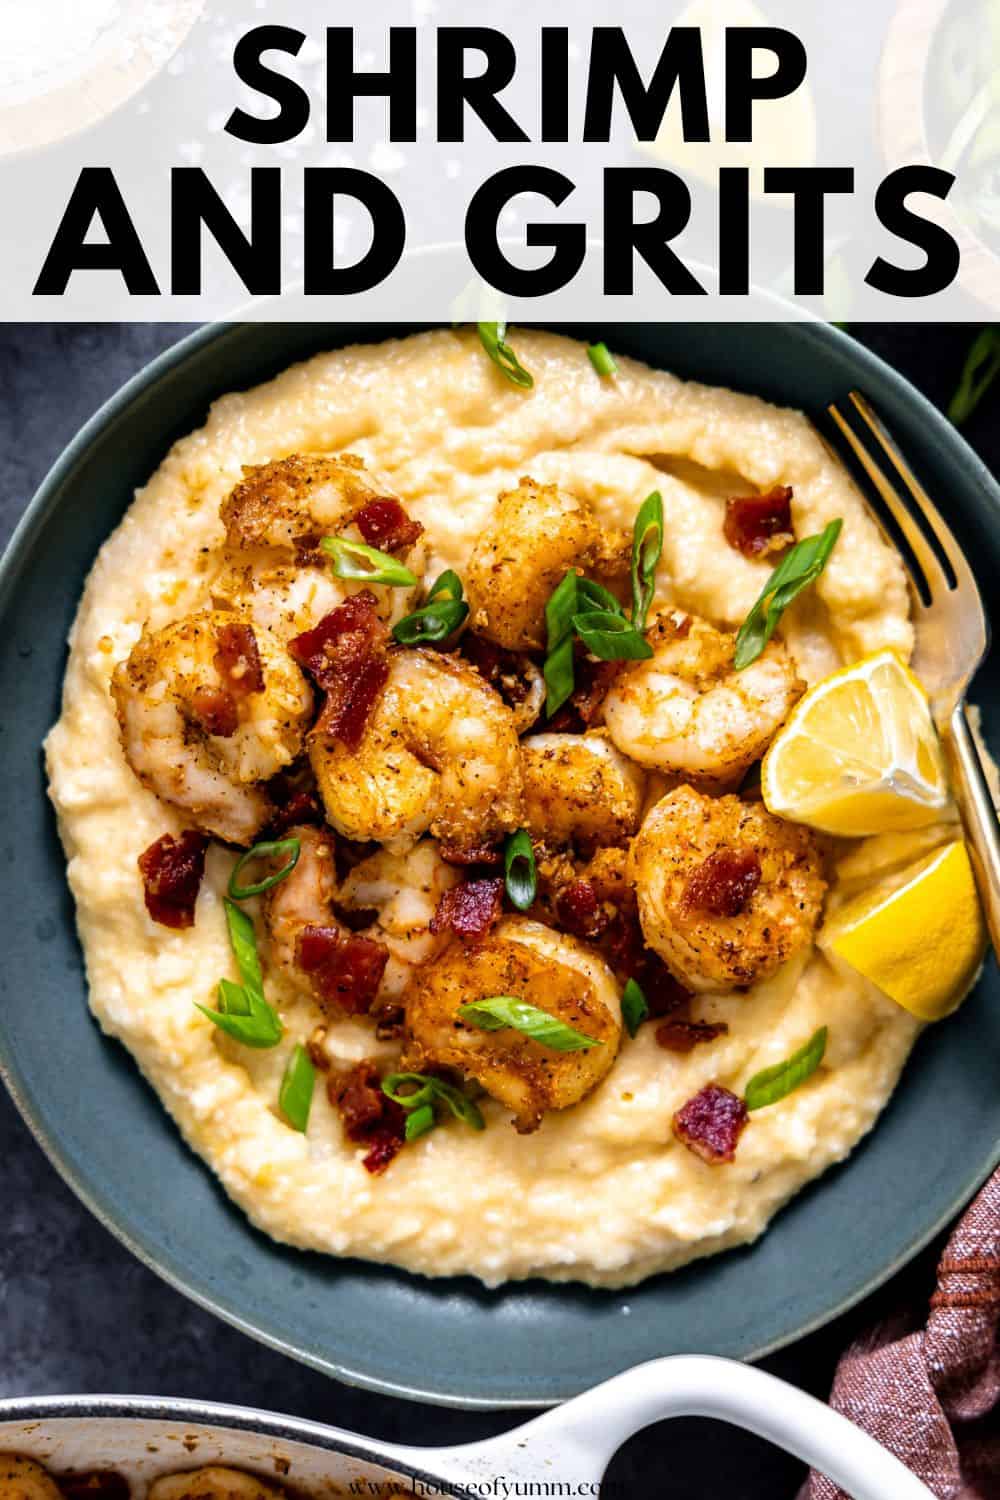 Shrimp and grits with text.